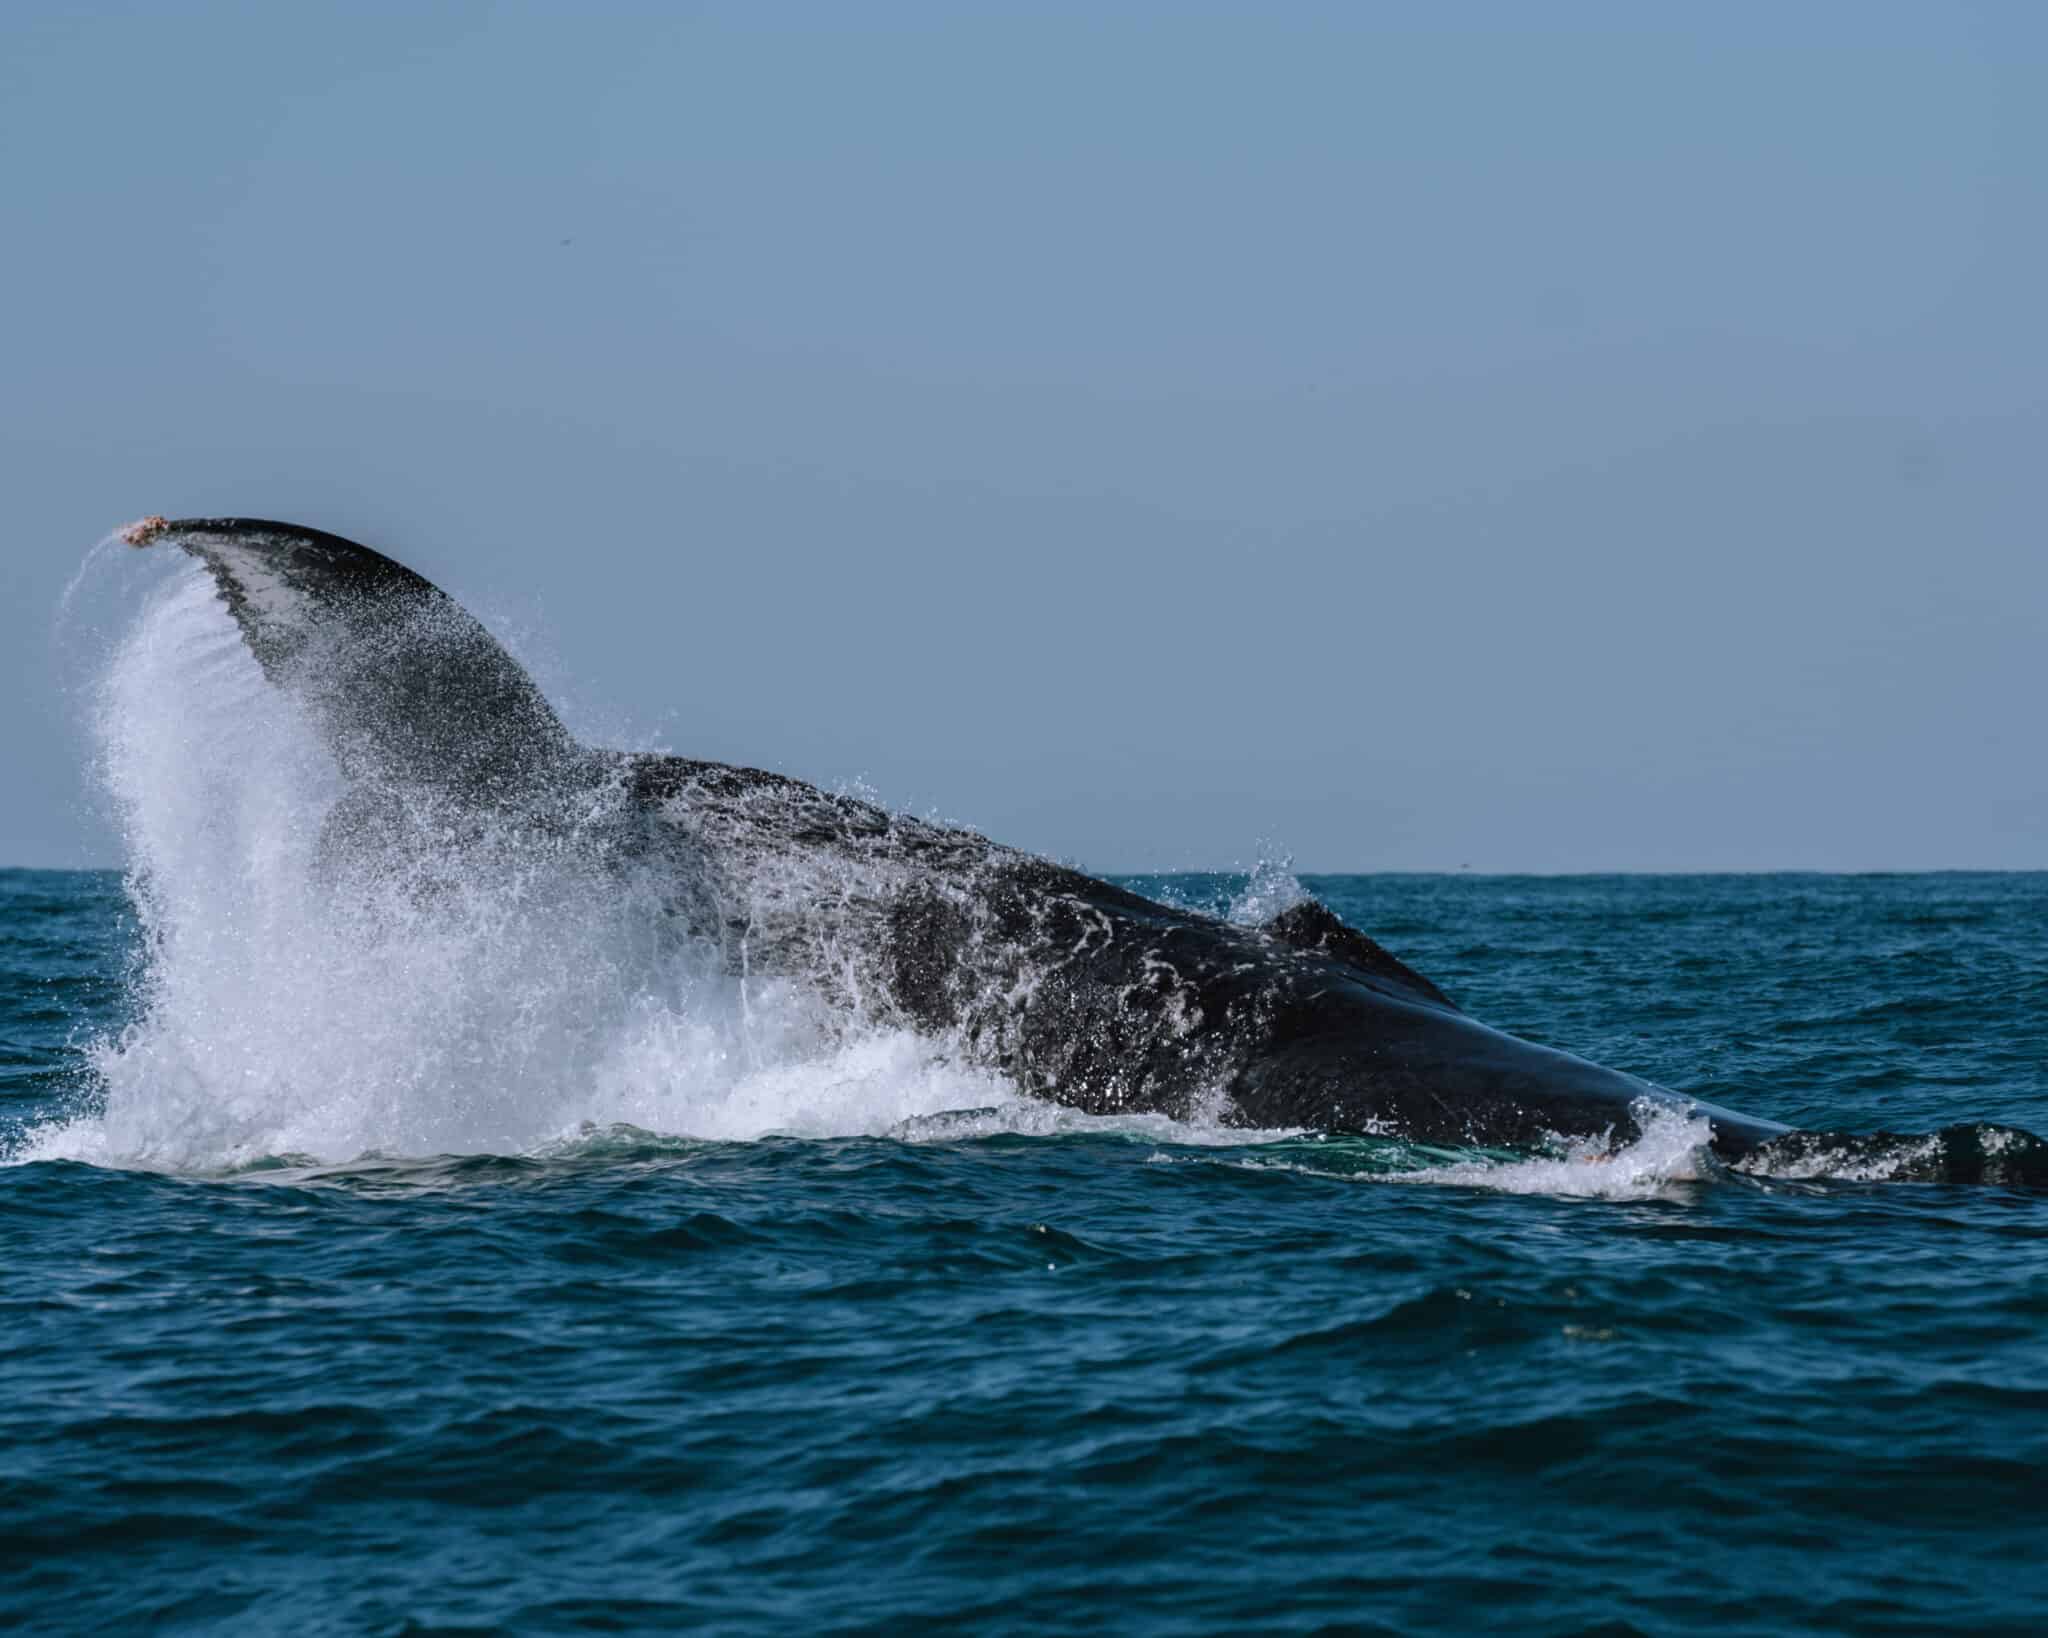 A whale is jumping out of the water in Sayulita.